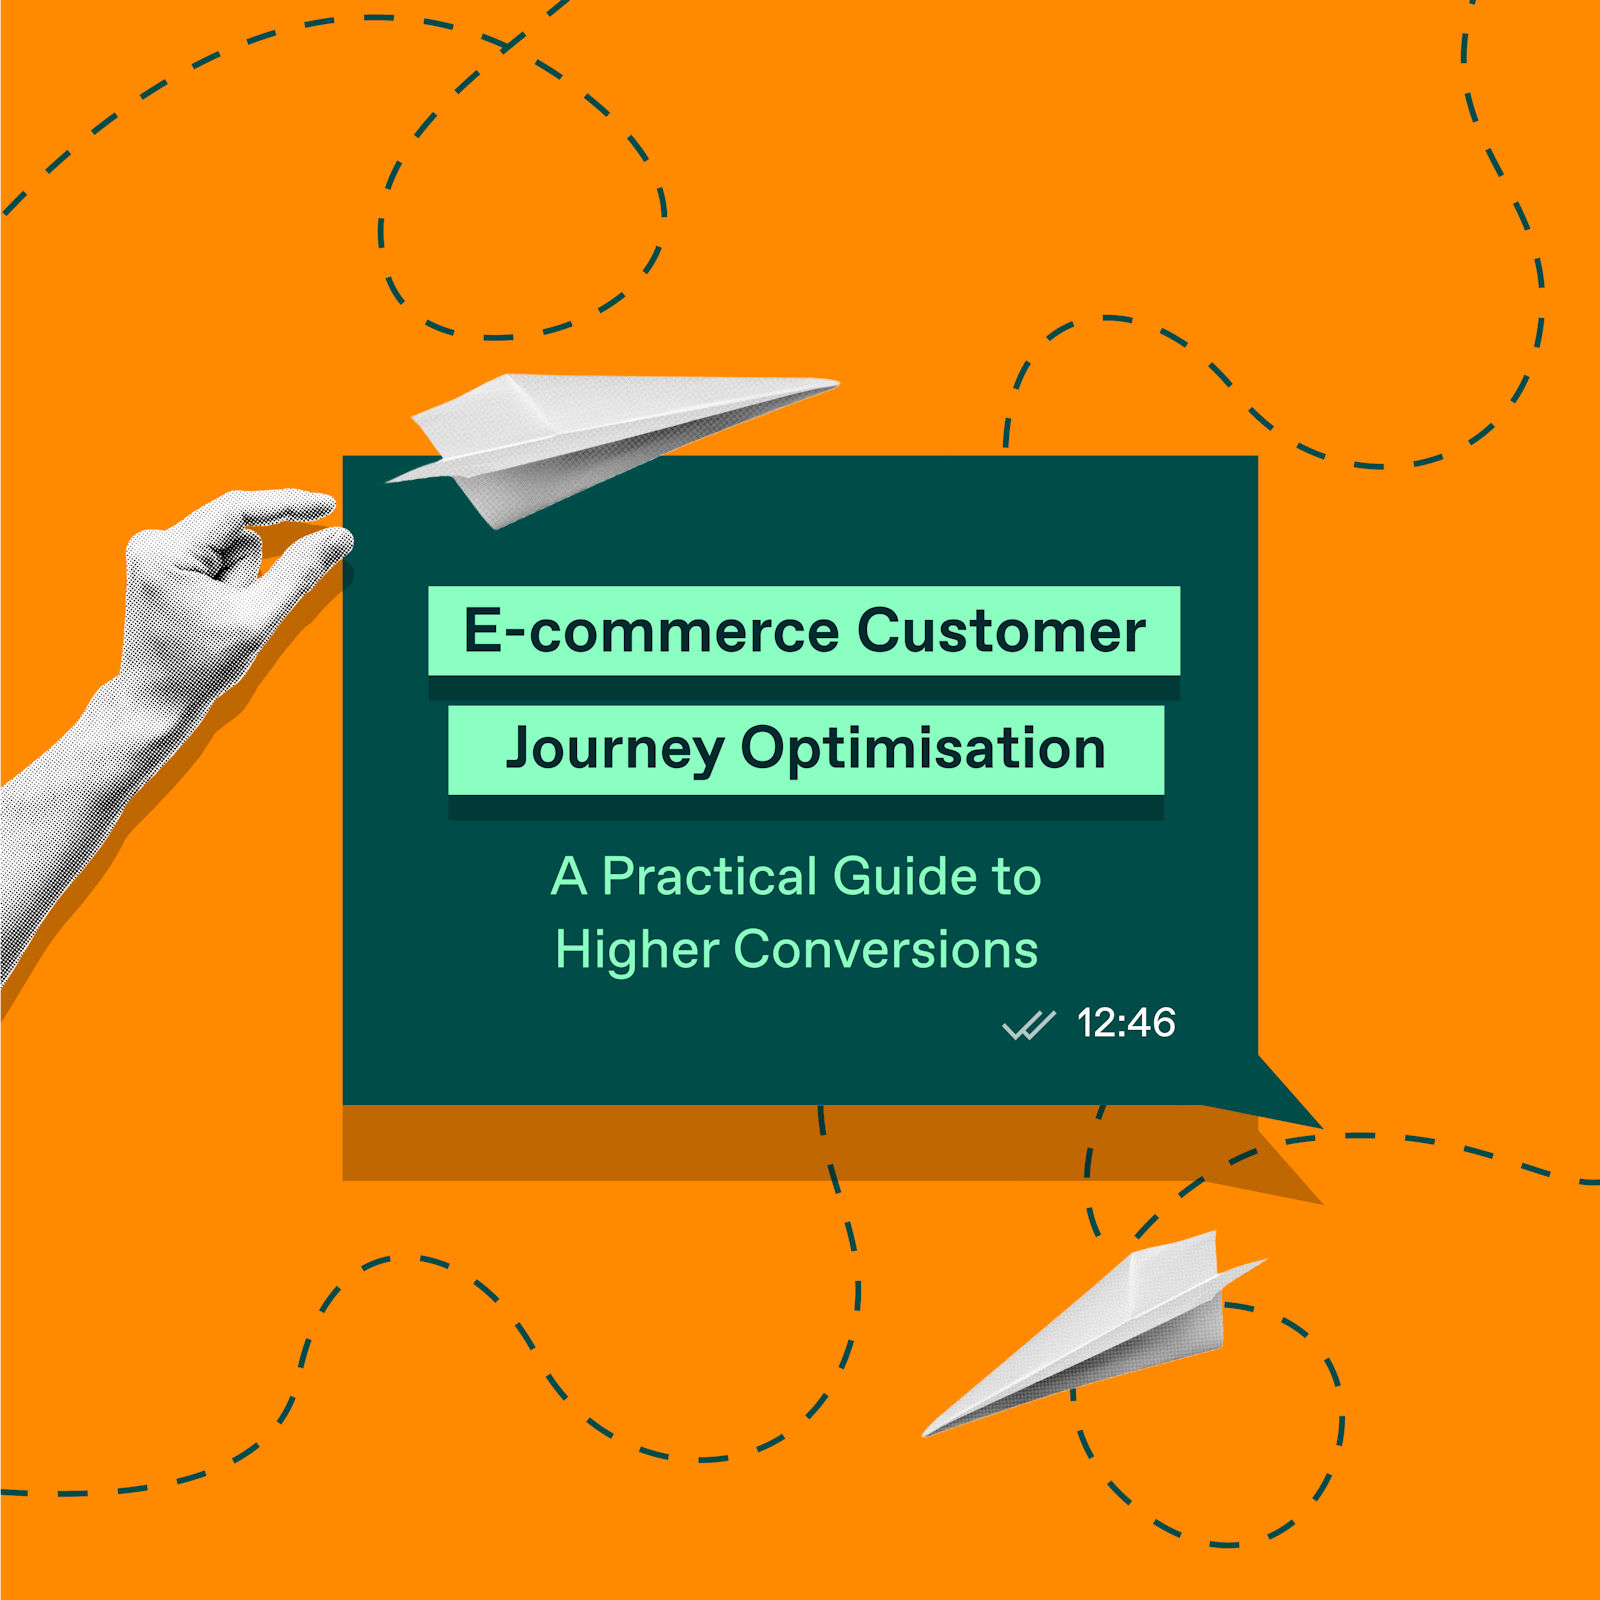 E-commerce Customer Journey Optimisation: A Practical Guide to Higher Conversions